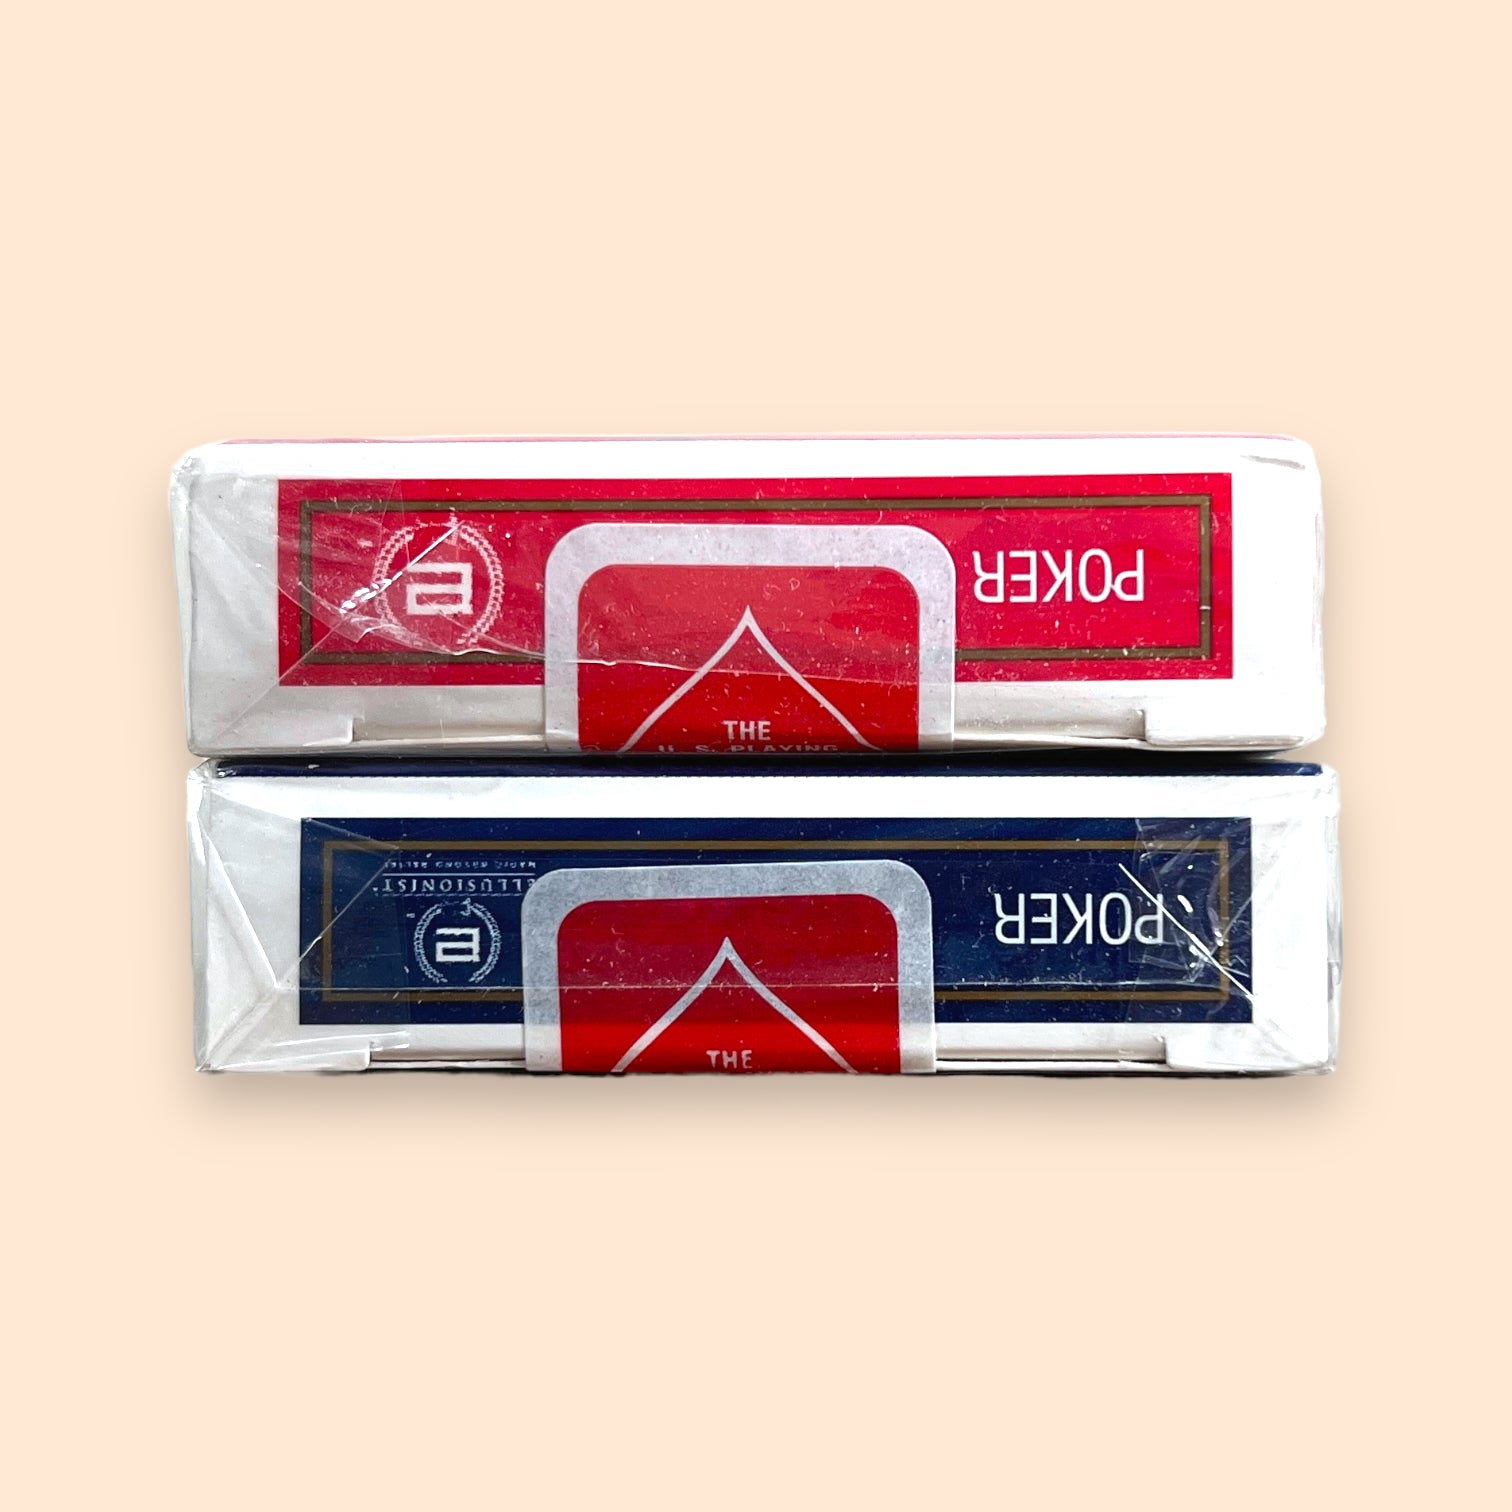 Bicycle Masters Red + Blue Playing Cards [UV500 Air Flow Finish]